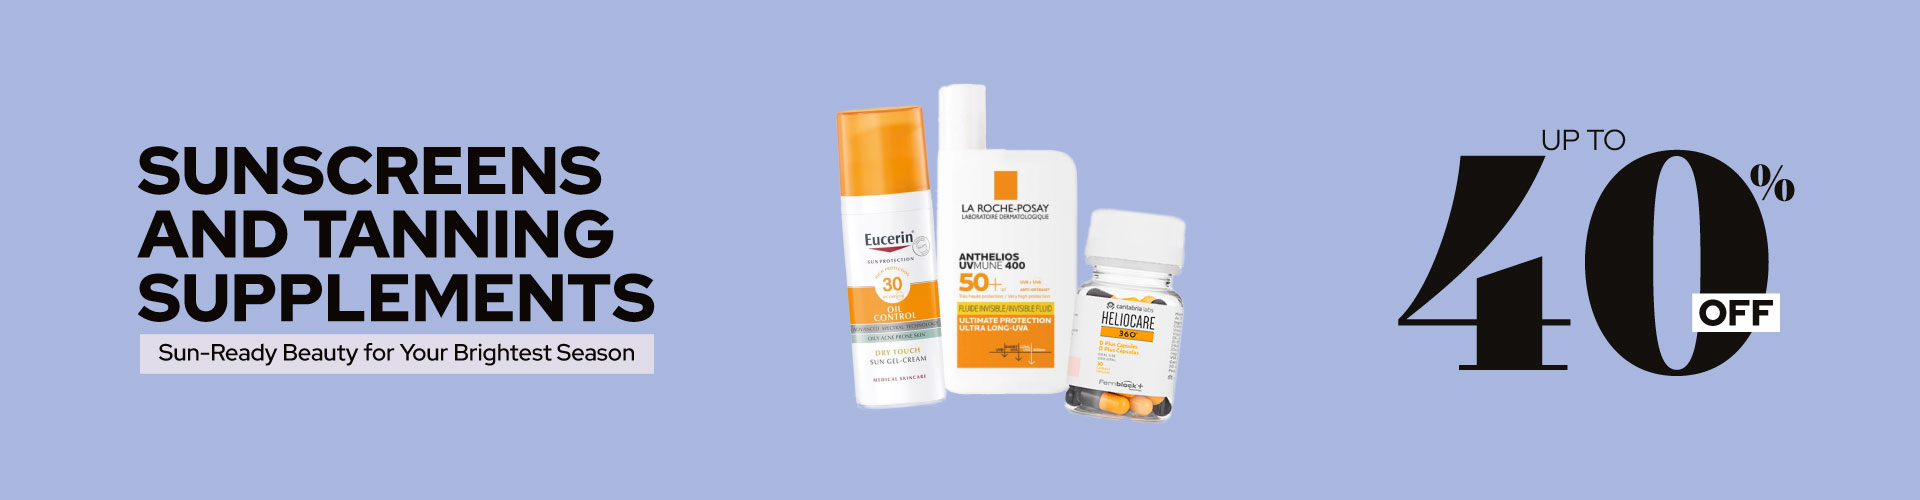 Sunscreens and Tanning Supplements  